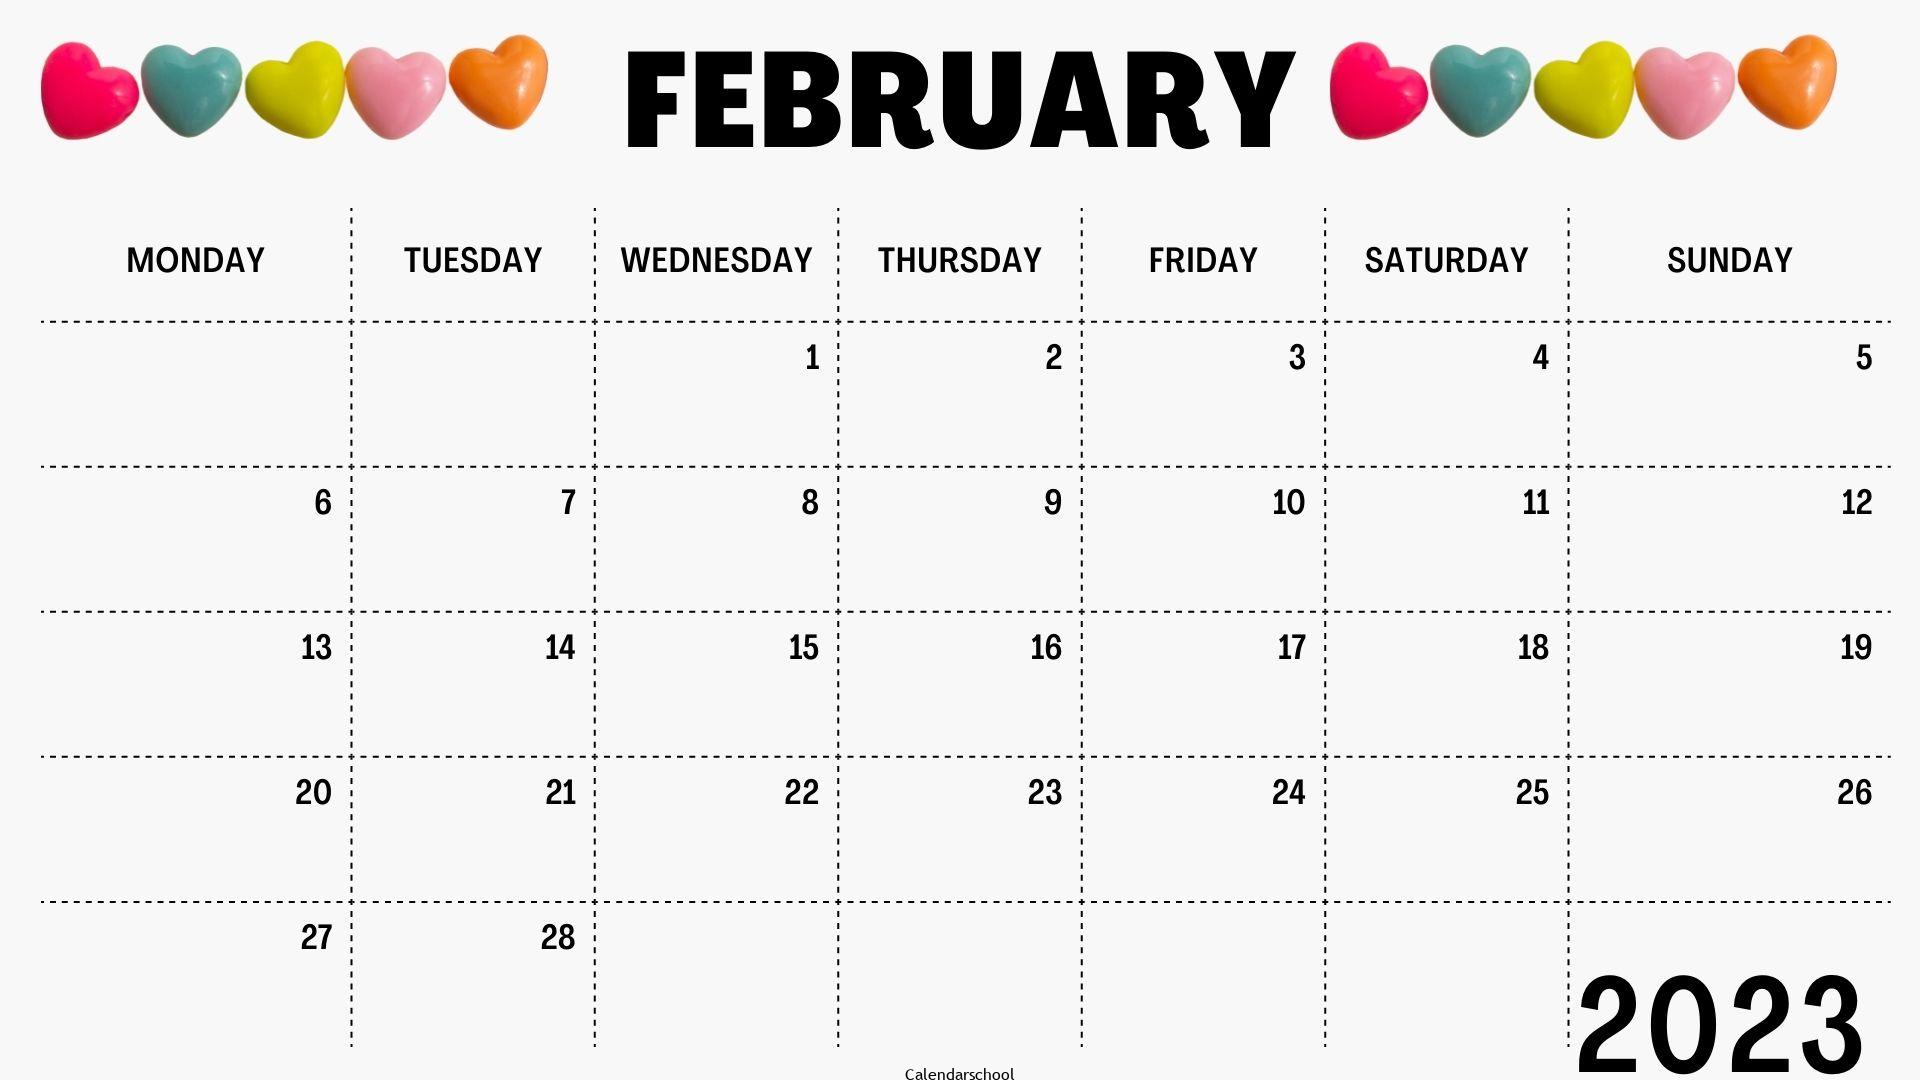 February 2023 Blank Calendar By Month With Holidays